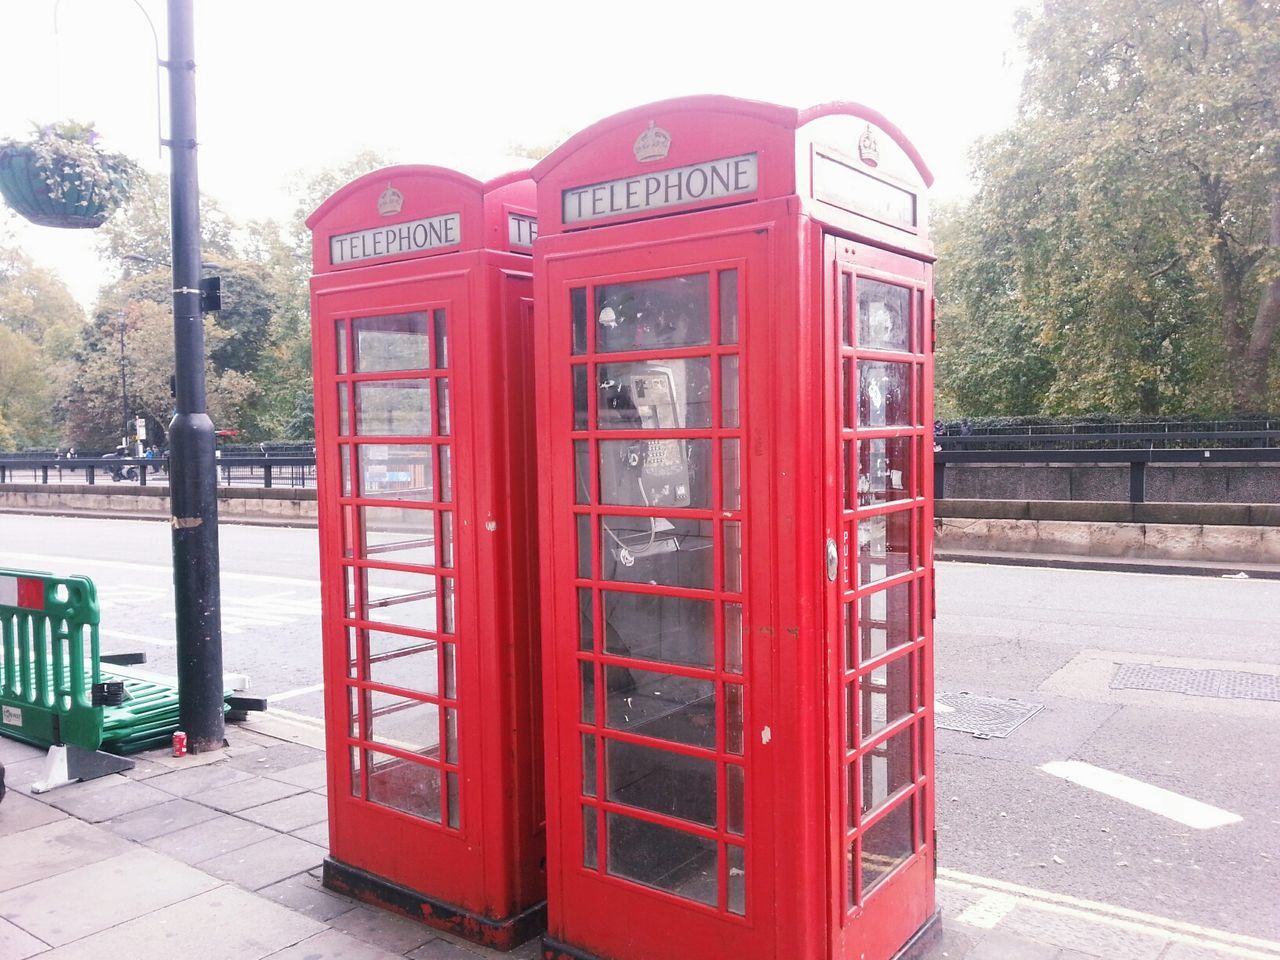 CLOSE-UP OF RED TELEPHONE BOOTH